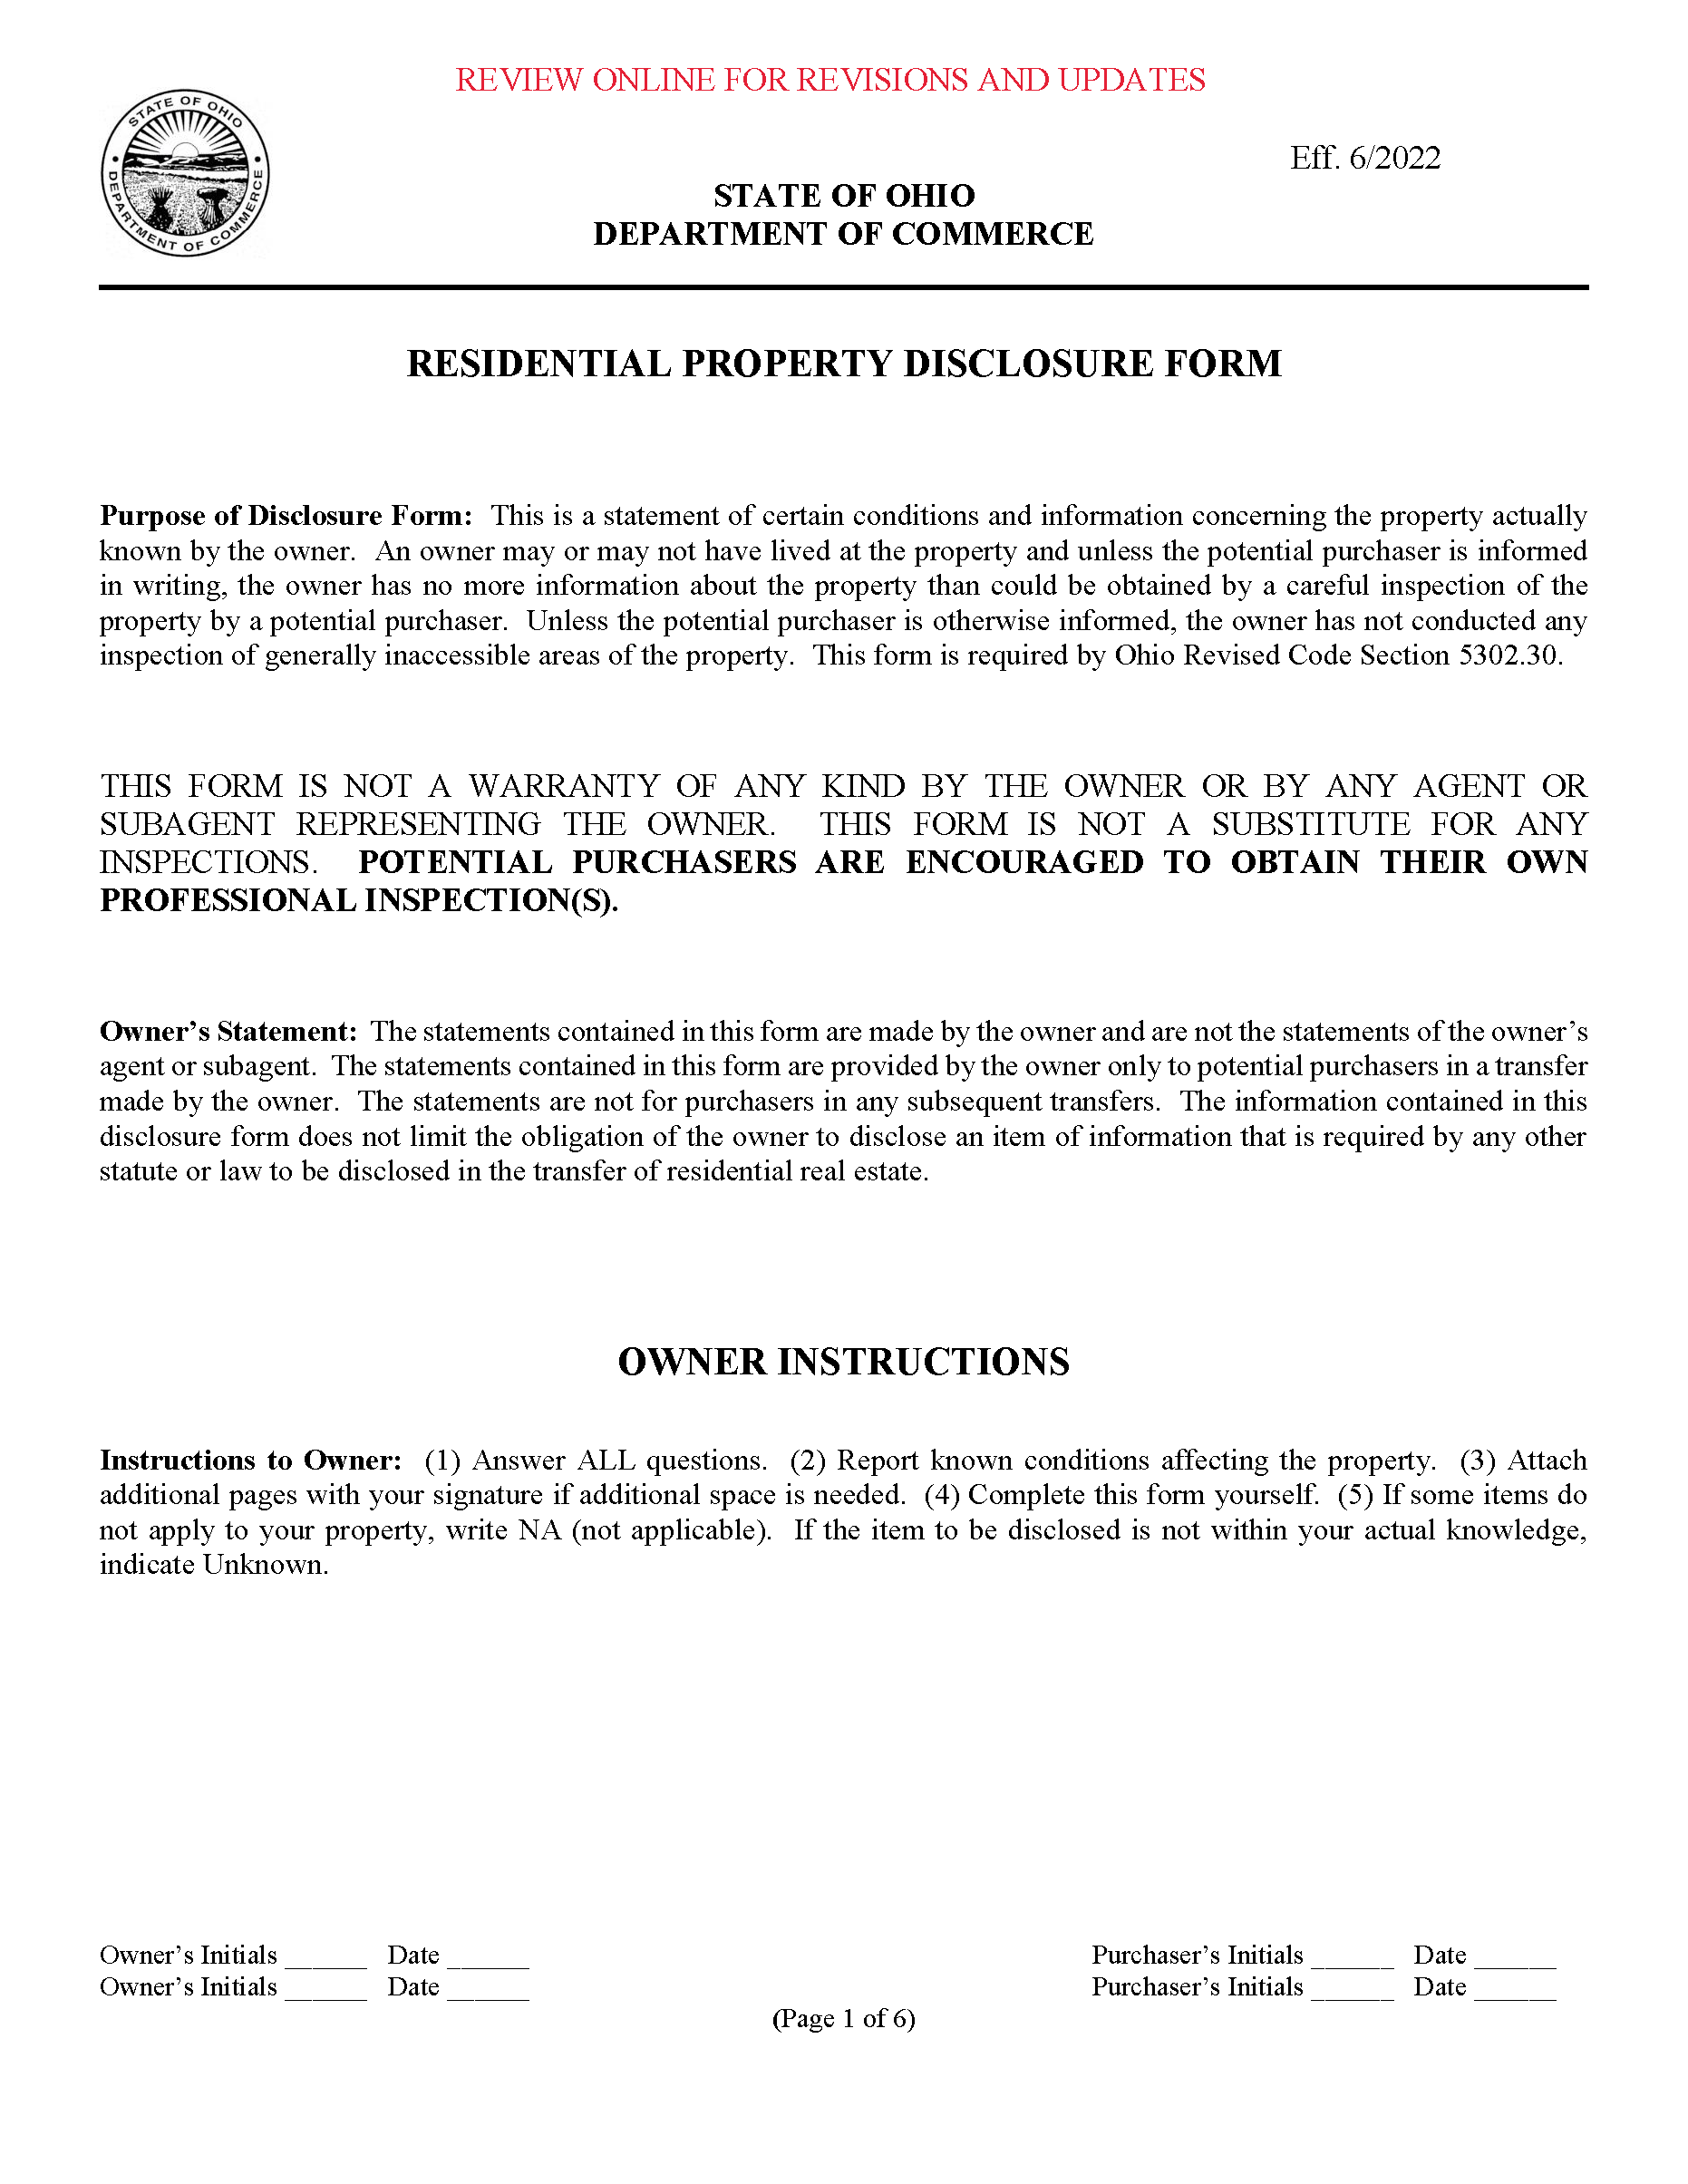 Noble County Residential Property Disclosure 